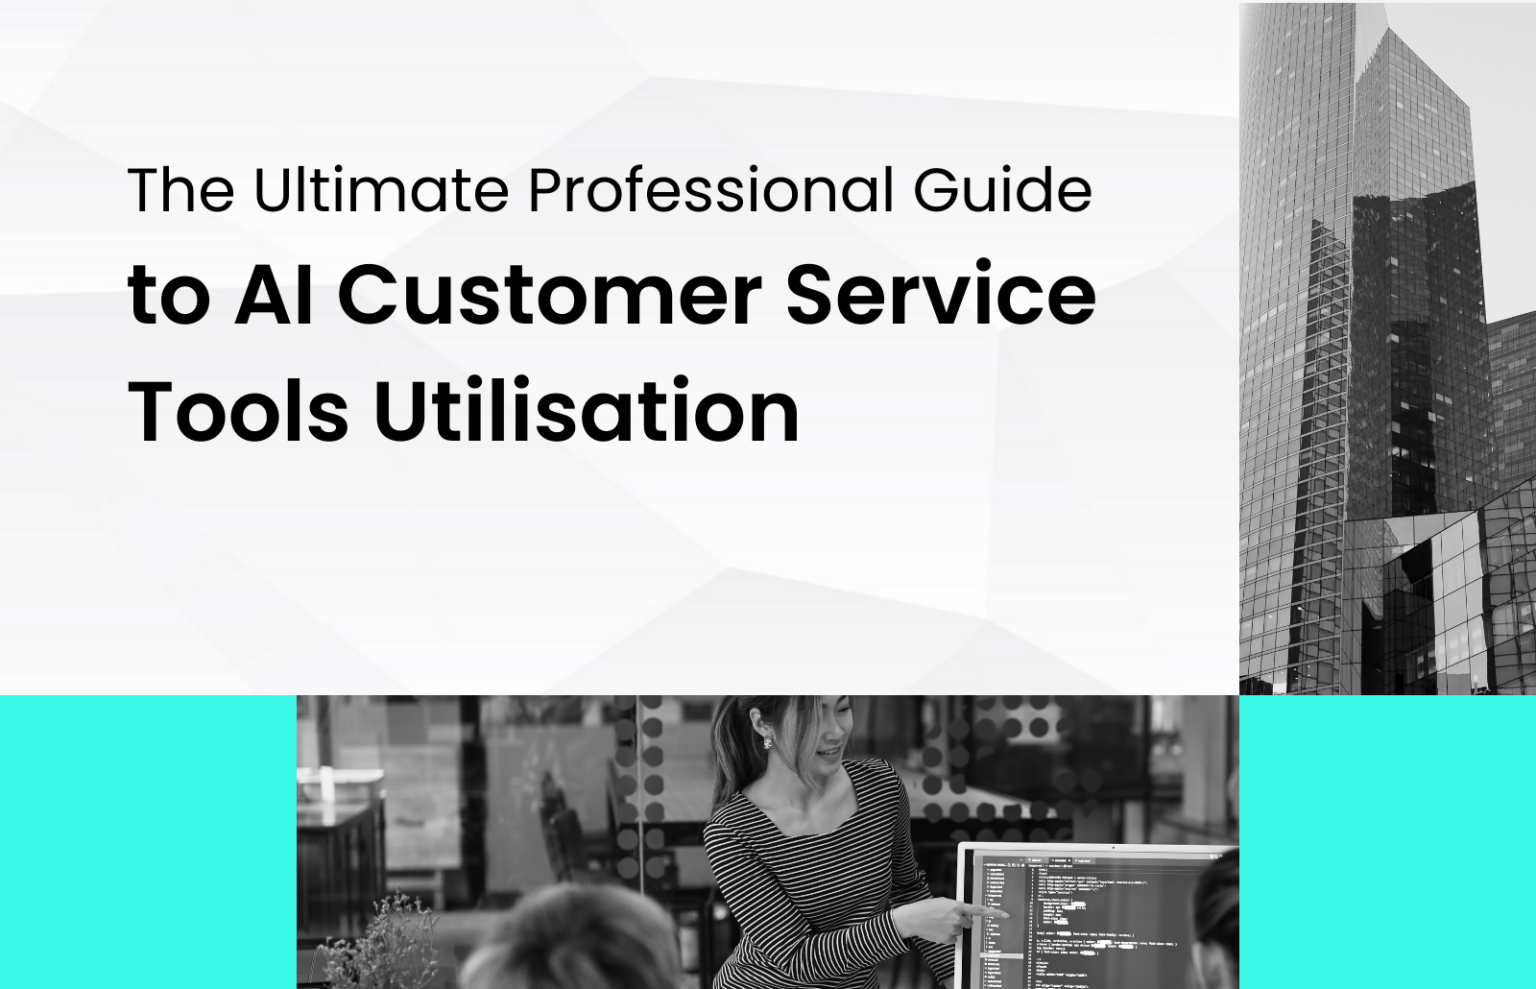 The Ultimate Professional Guide to AI Customer Service Tools Utilisation